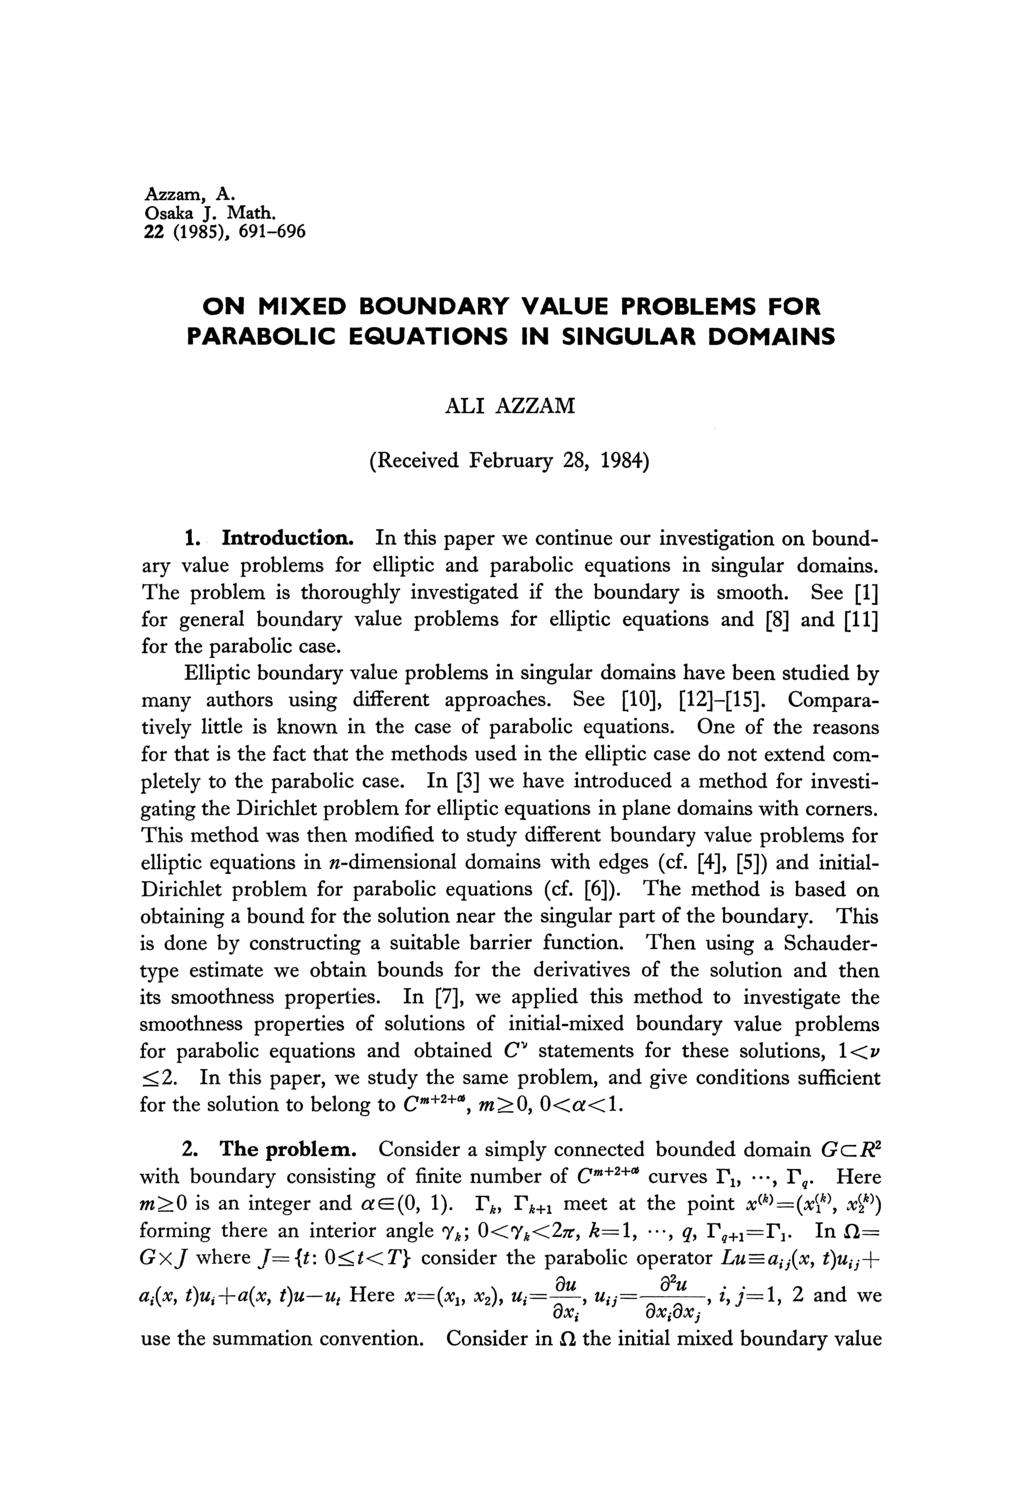 Azzam, A. Osaka J. Math. 22 (1985), 691-696 ON MIXED BOUNDARY VALUE PROBLEMS FOR PARABOLIC EQUATIONS IN SINGULAR DOMAINS ALI AZZAM (Received February 28, 1984) 1. Introduction.